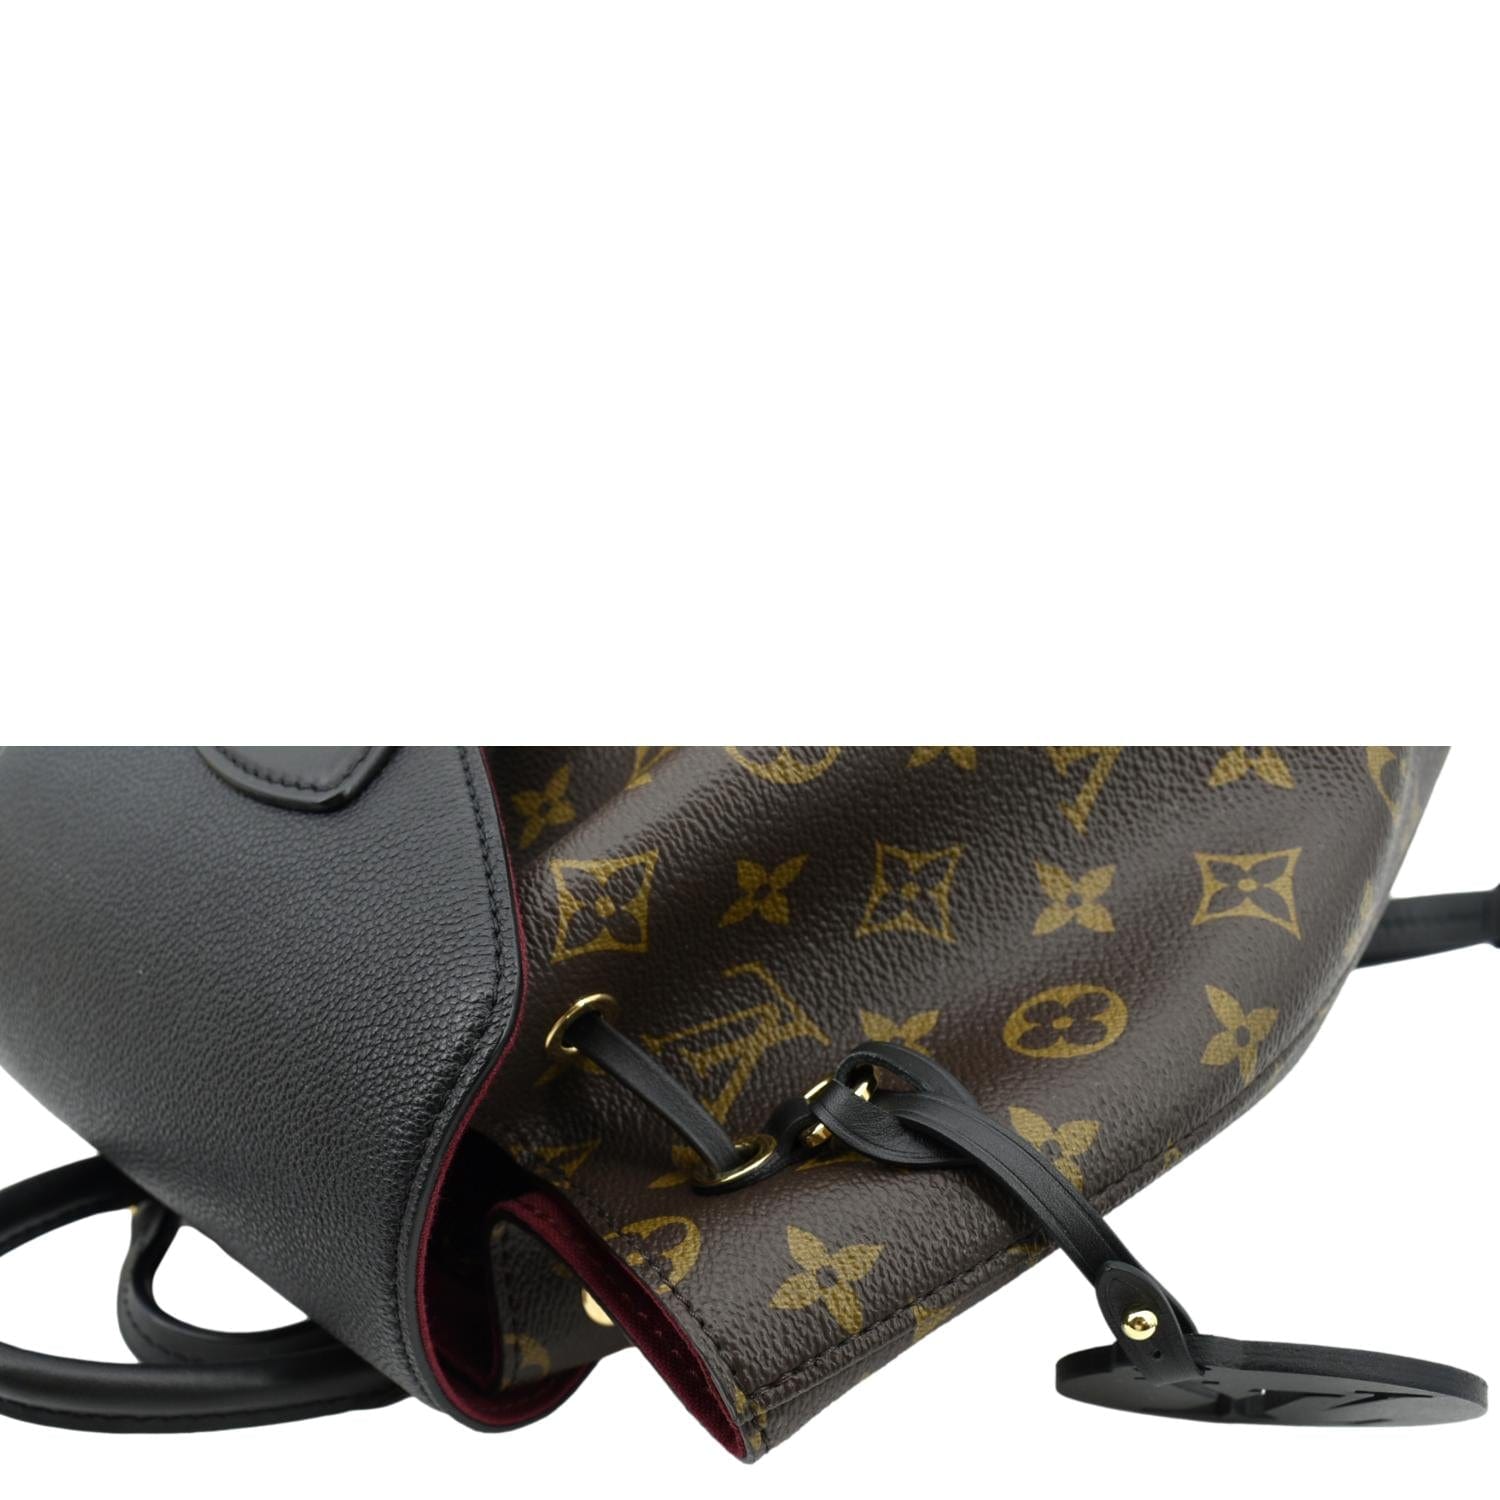 Louis Vuitton Montsouris NM Backpack Monogram Canvas with Leather PM Black  2282431